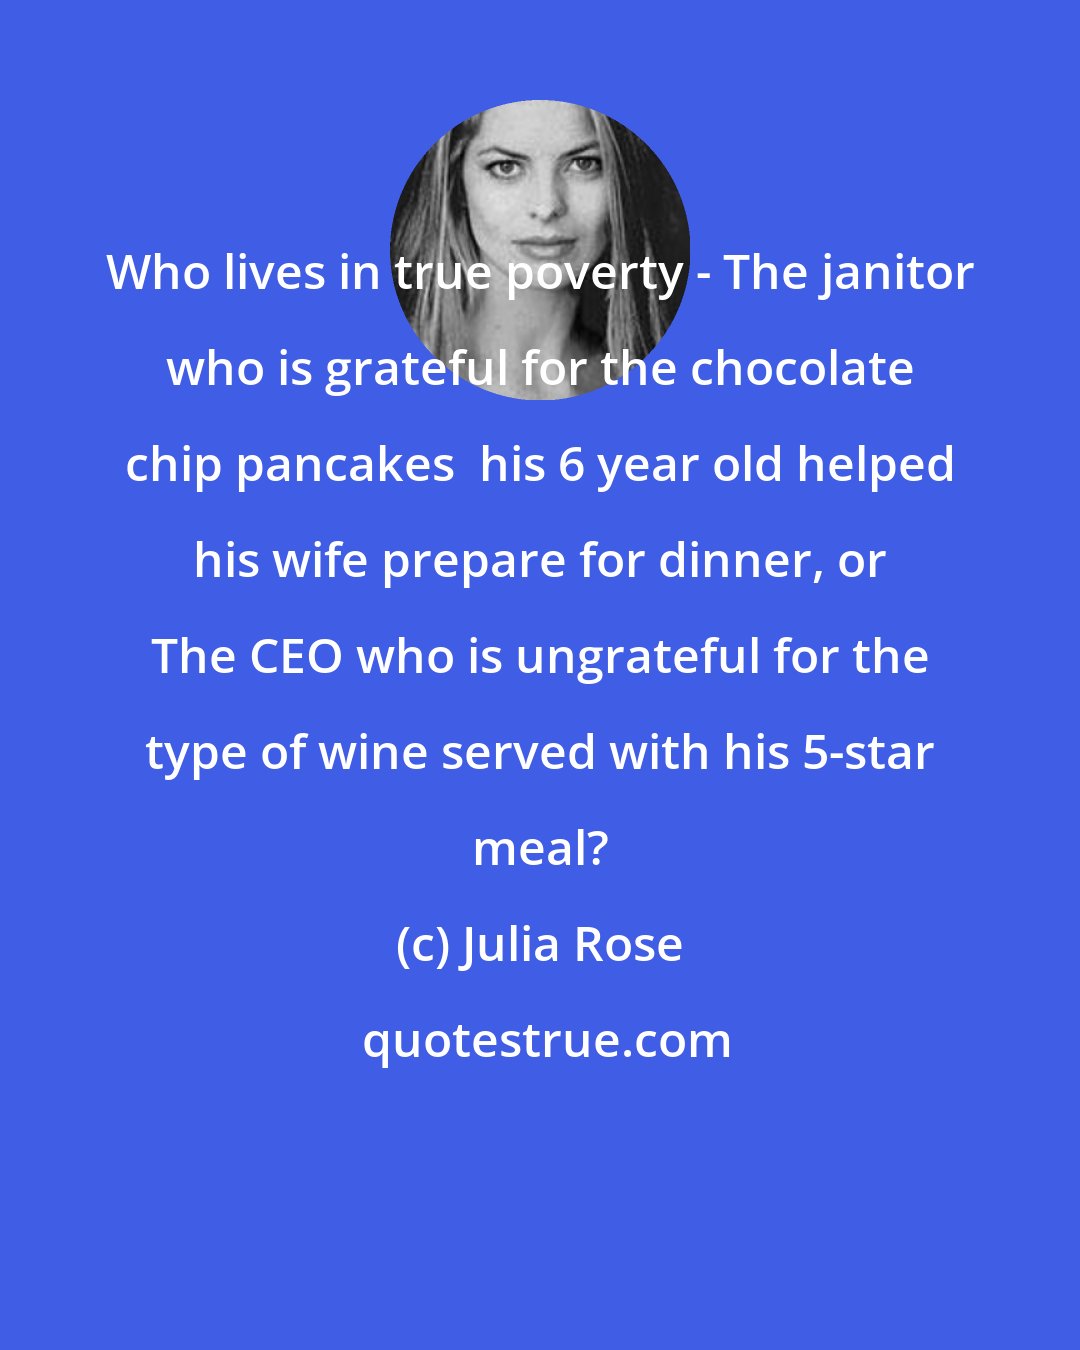 Julia Rose: Who lives in true poverty - The janitor who is grateful for the chocolate chip pancakes  his 6 year old helped his wife prepare for dinner, or The CEO who is ungrateful for the type of wine served with his 5-star meal?